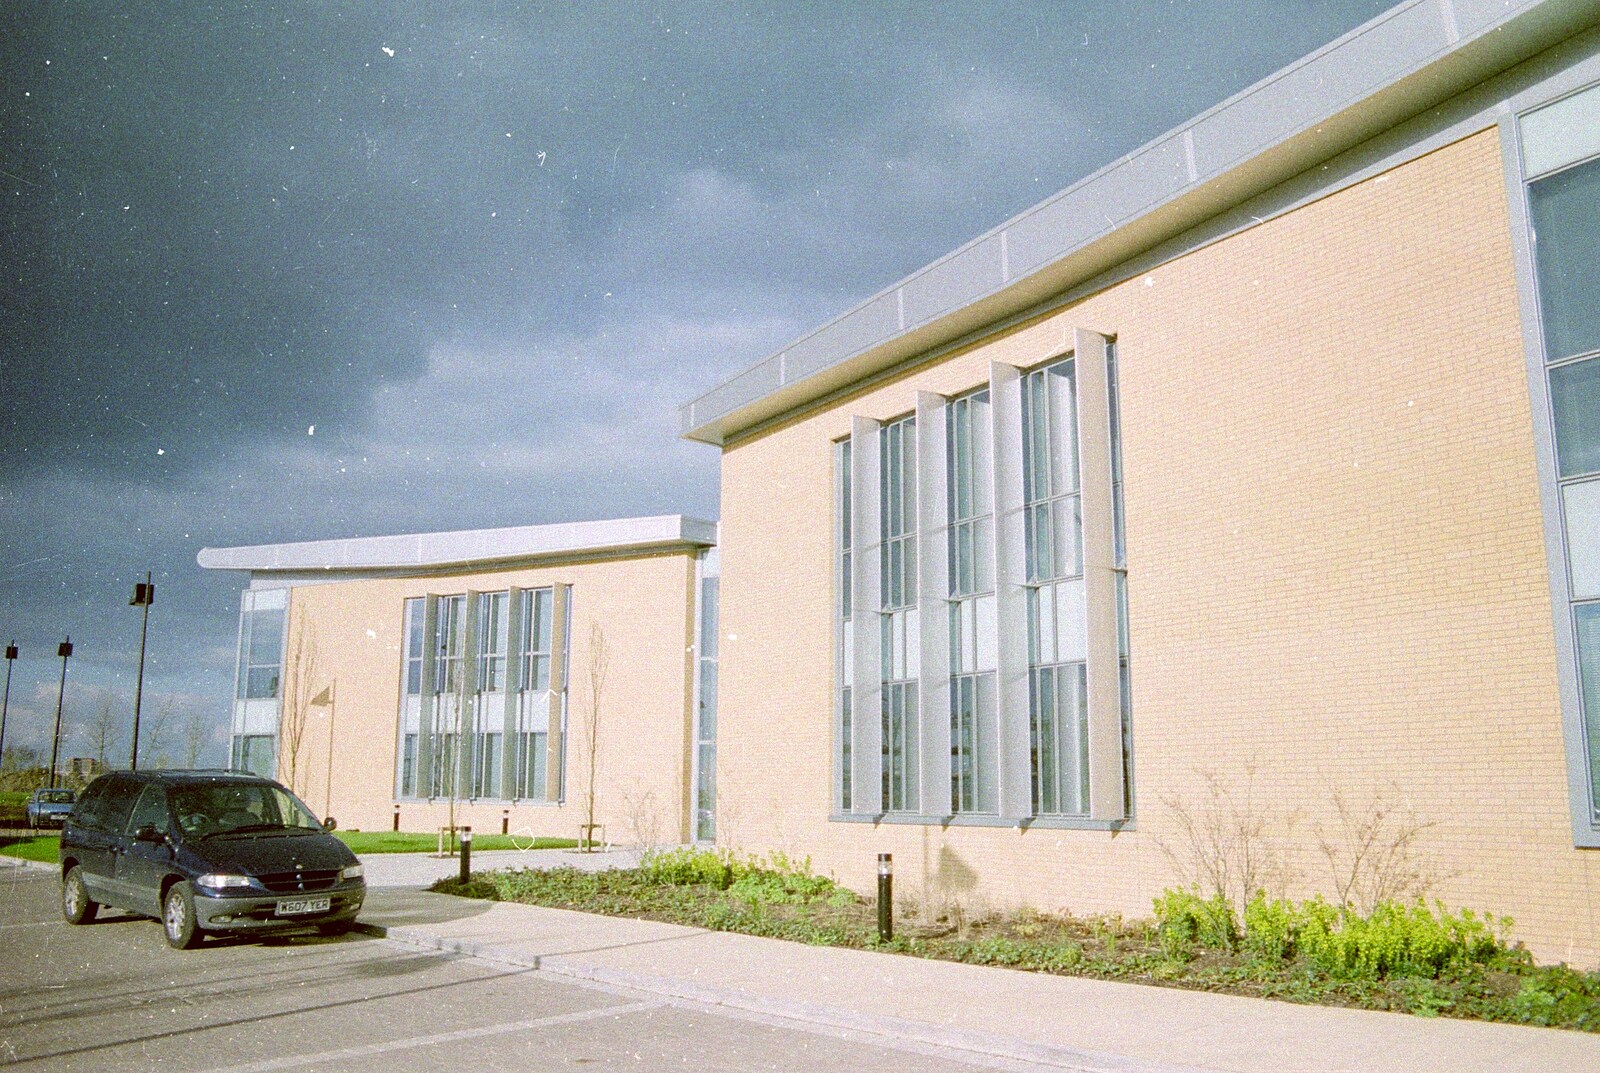 The 3G Lab Cambourne 'open prison' office from 3G Lab Moves Offices, Milton Road, Cambourne and Cambridge - 27th August 2001